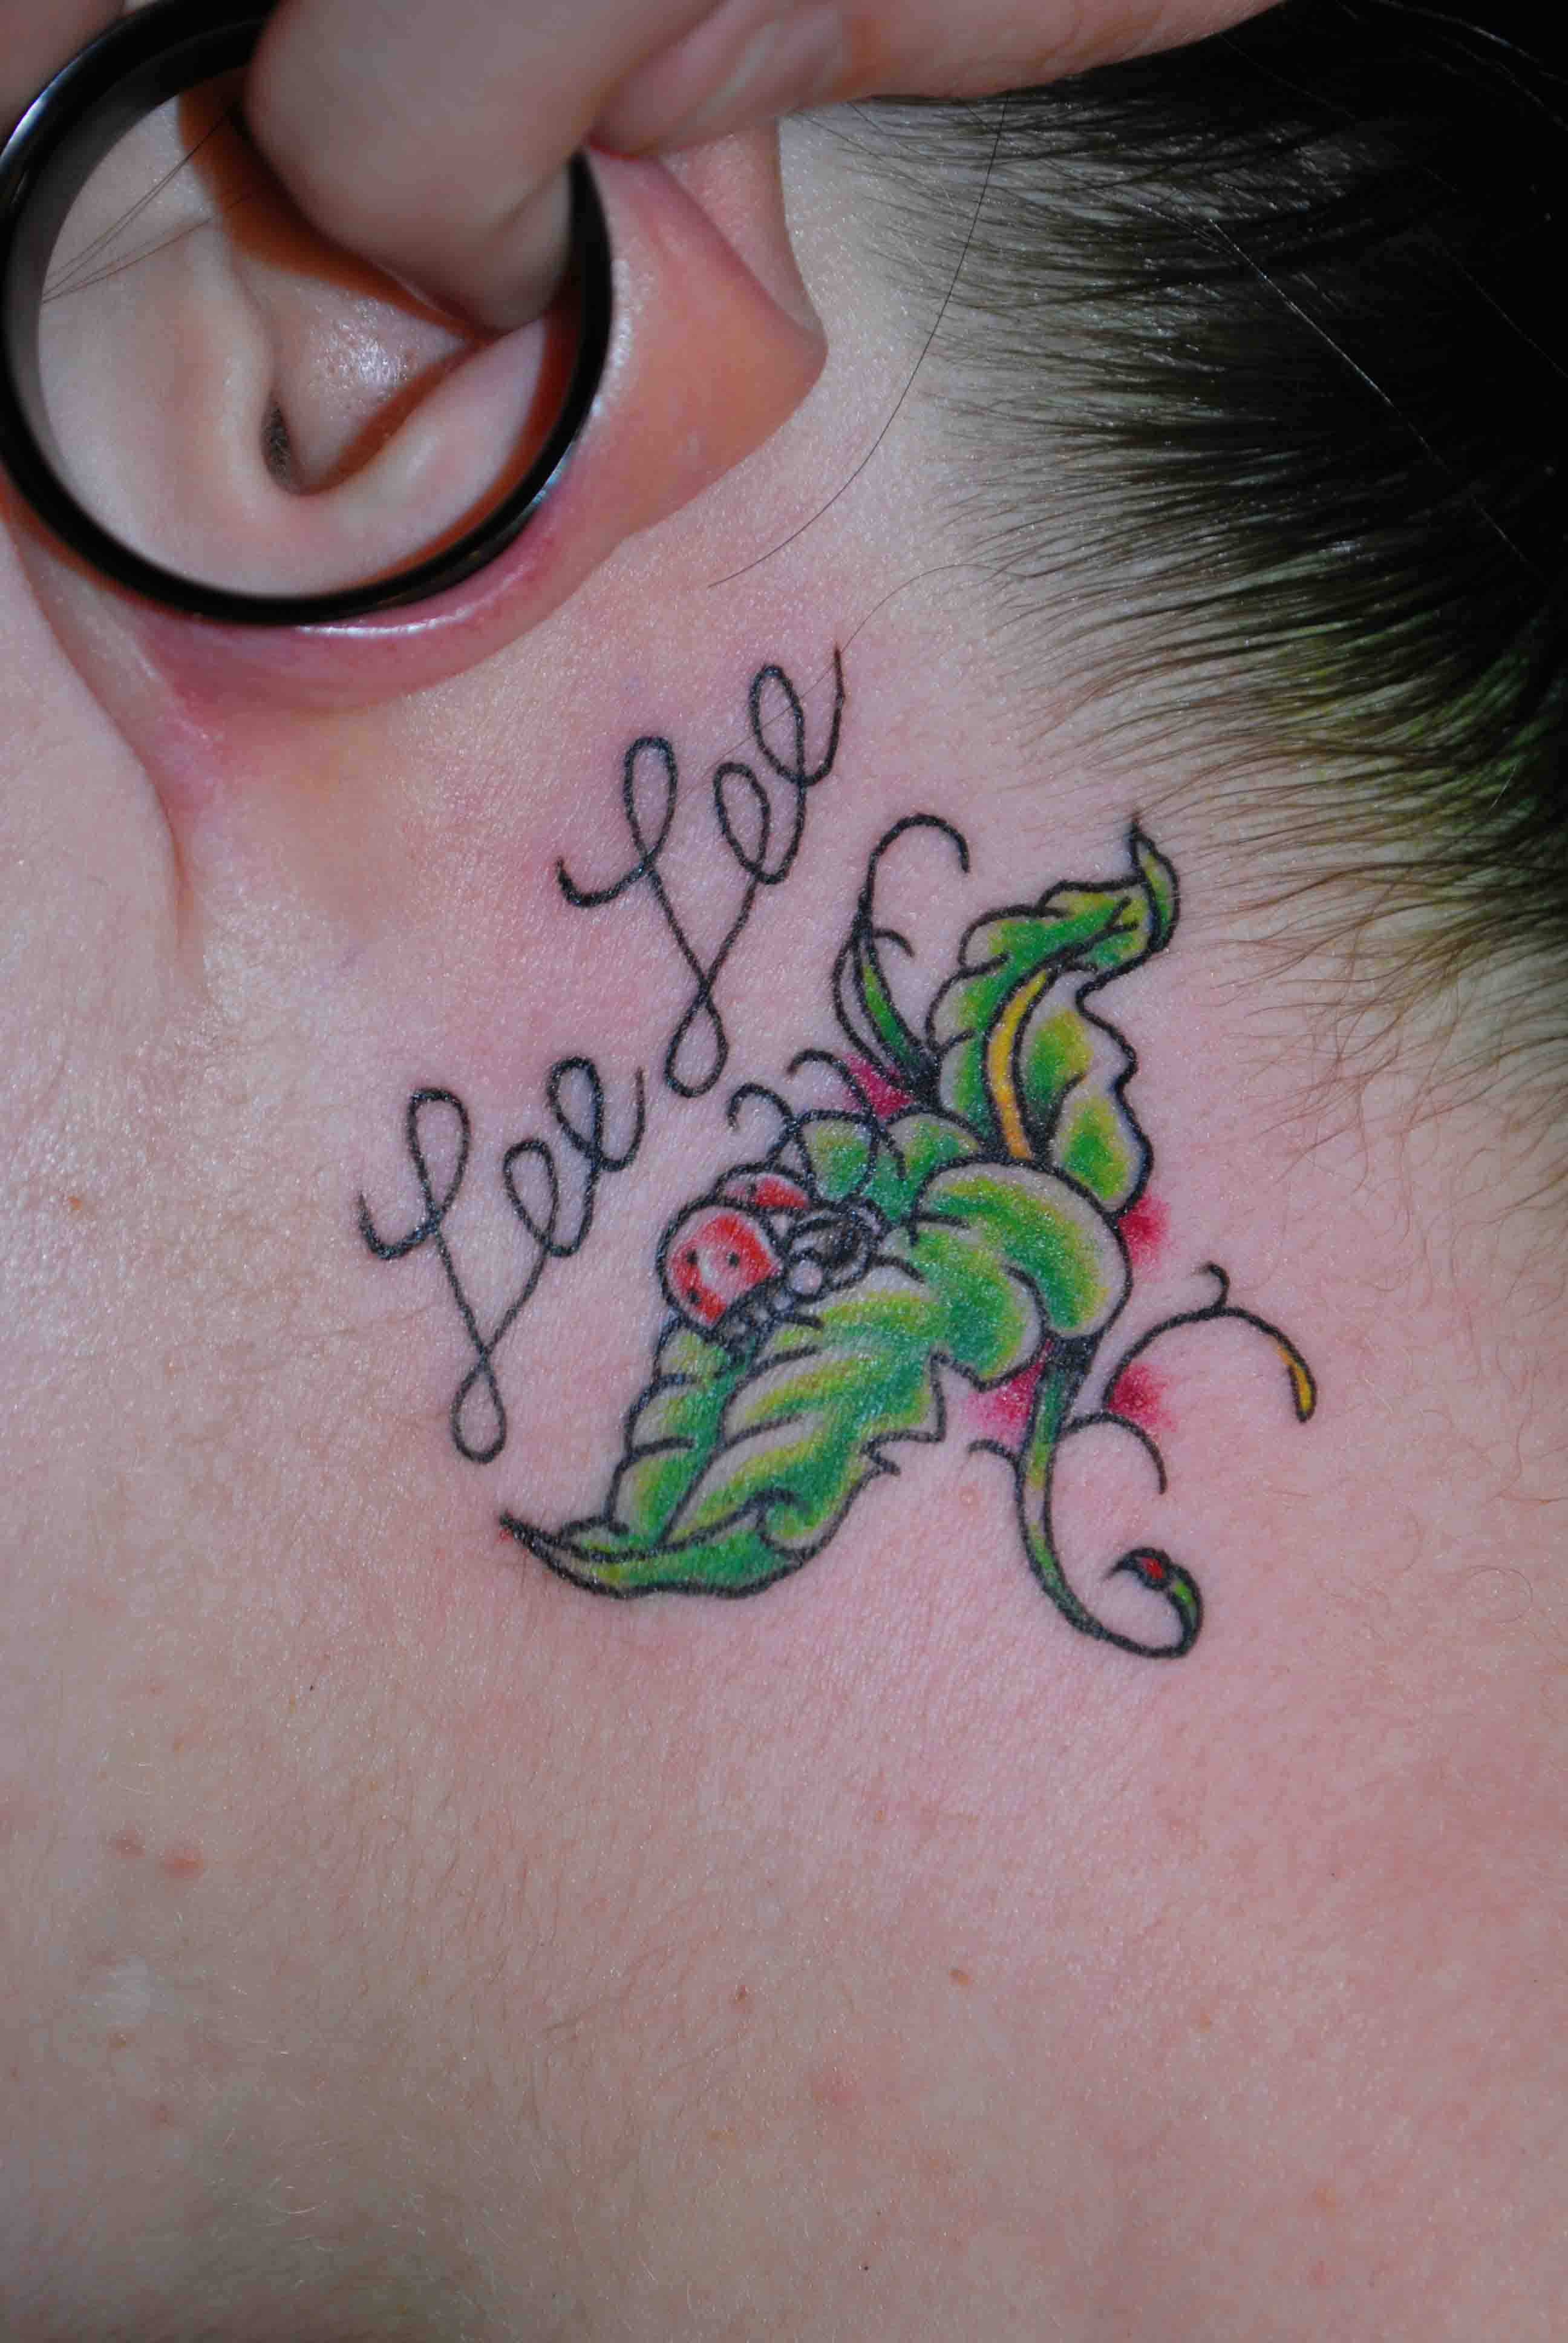 Name tattoo with flower design behind ear